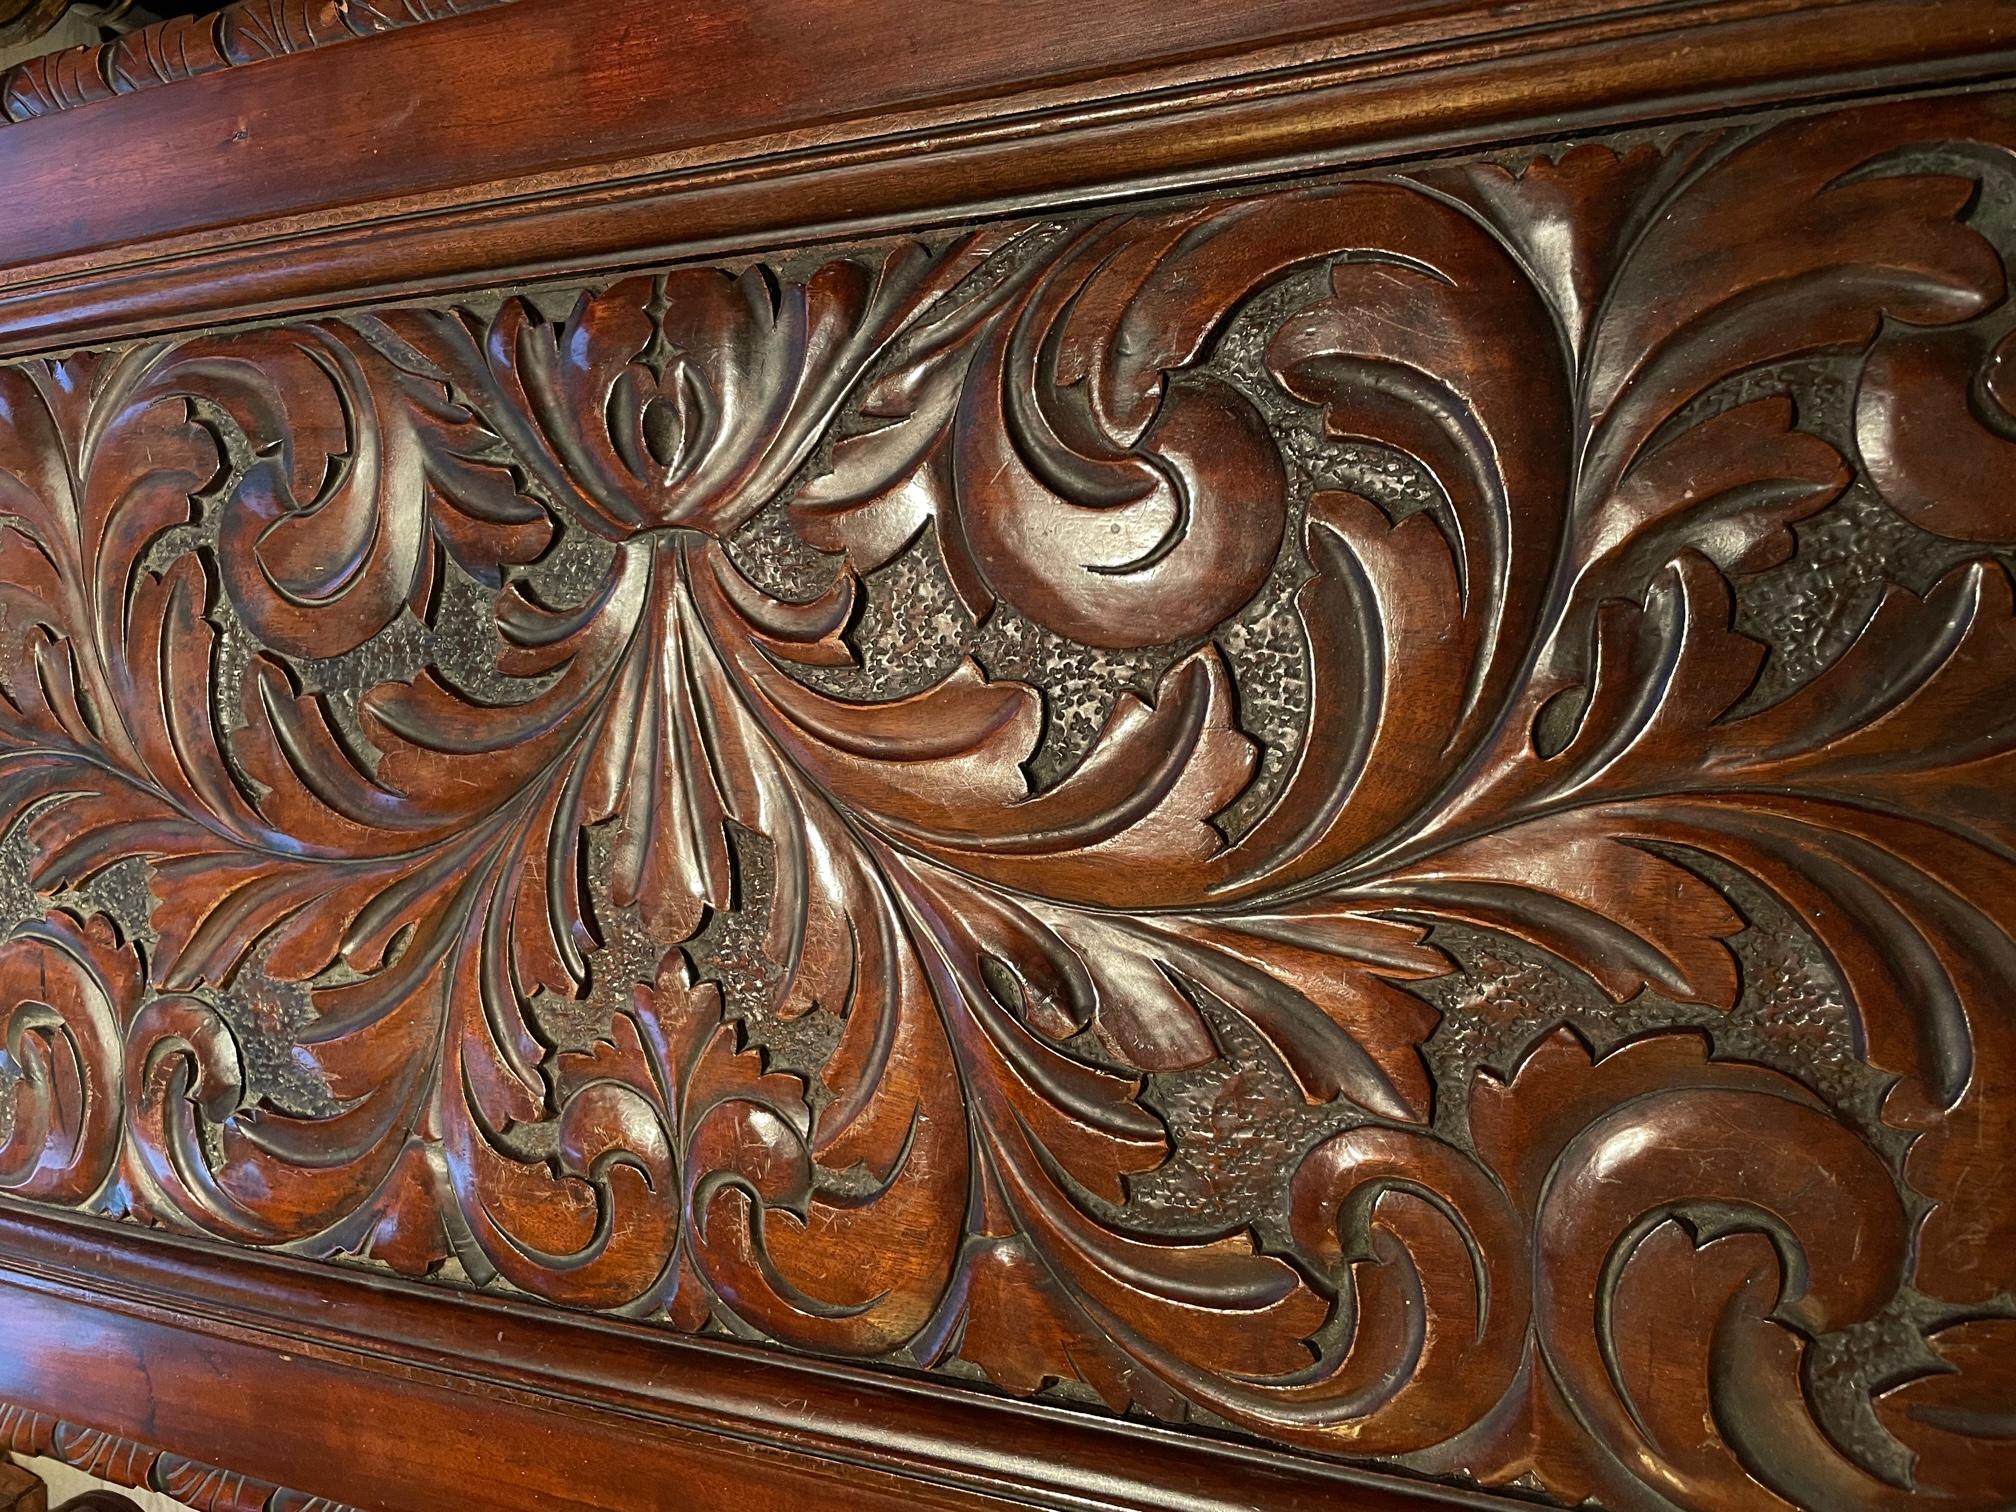 19th Century Baroque Revival Carved Wooden Blanket Chest In Good Condition For Sale In Vero Beach, FL